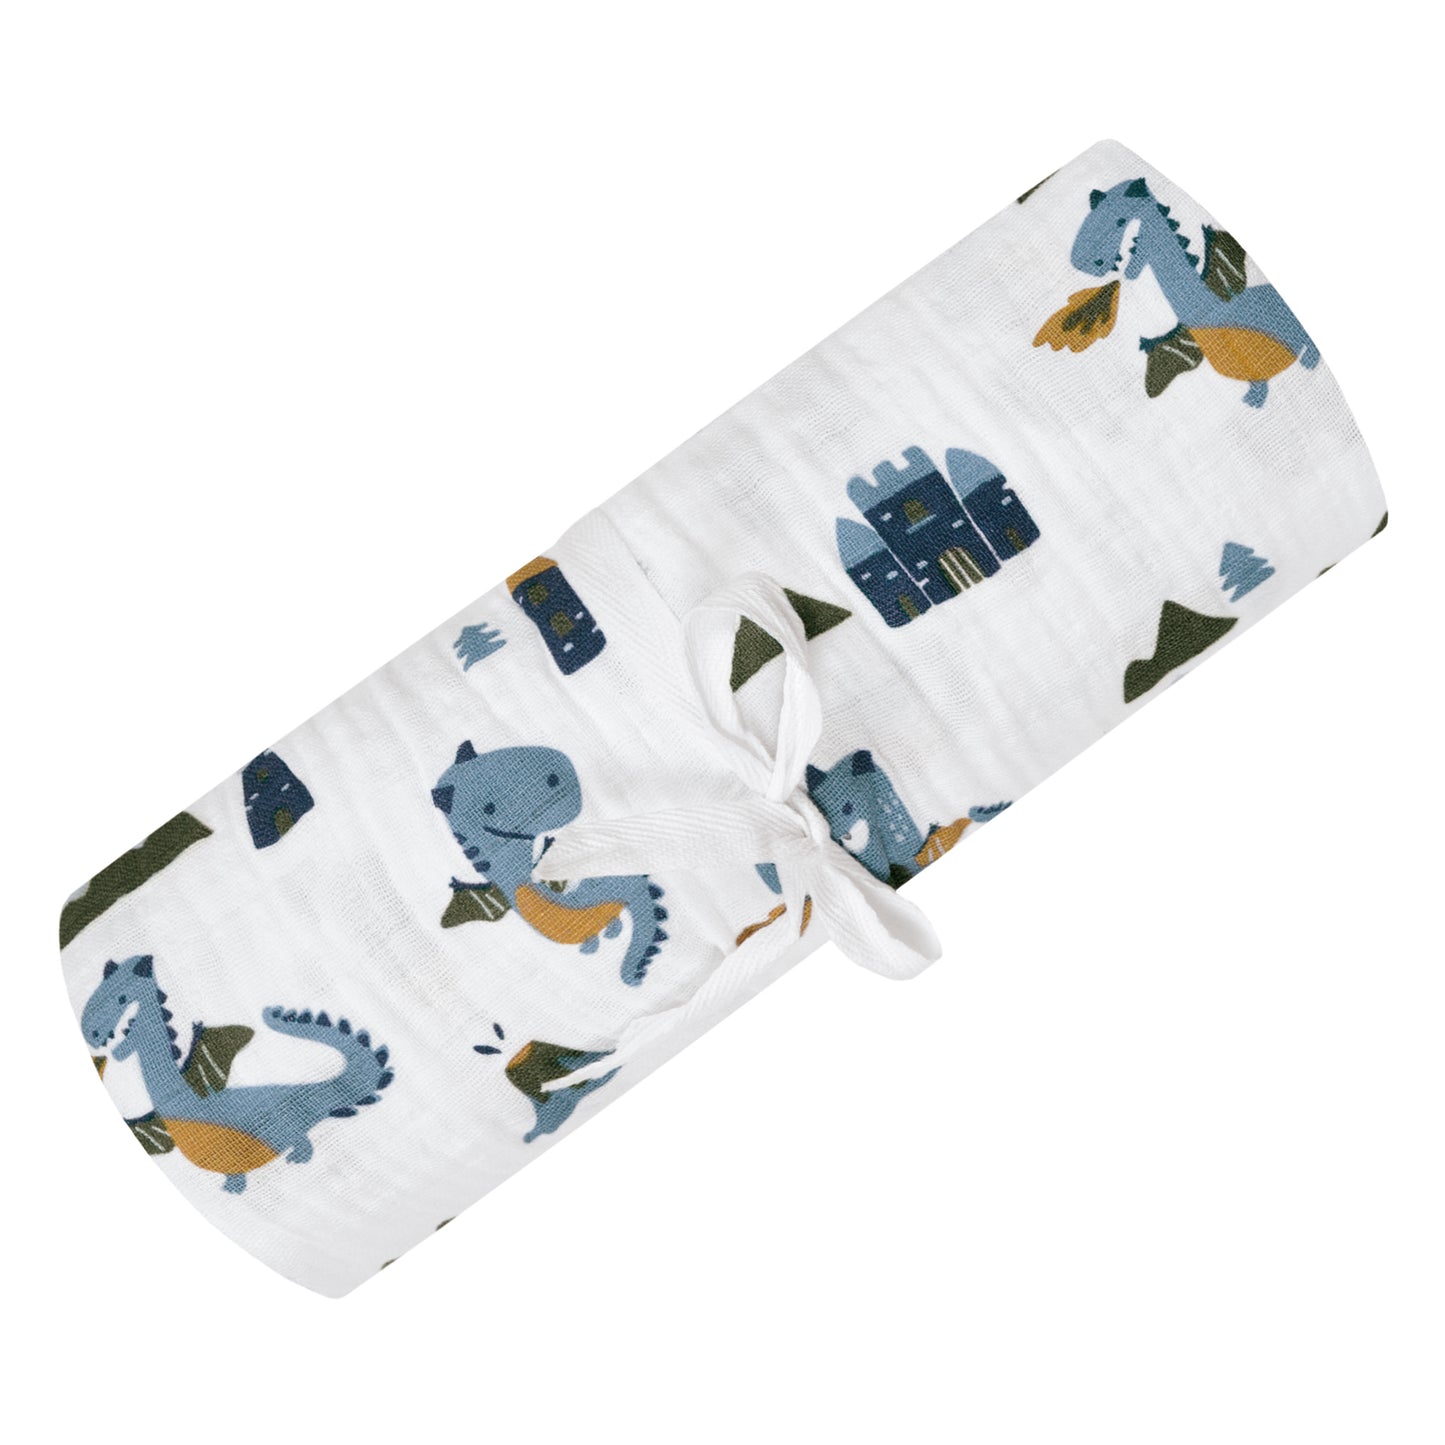 Cotton muslin swaddle - Dragons